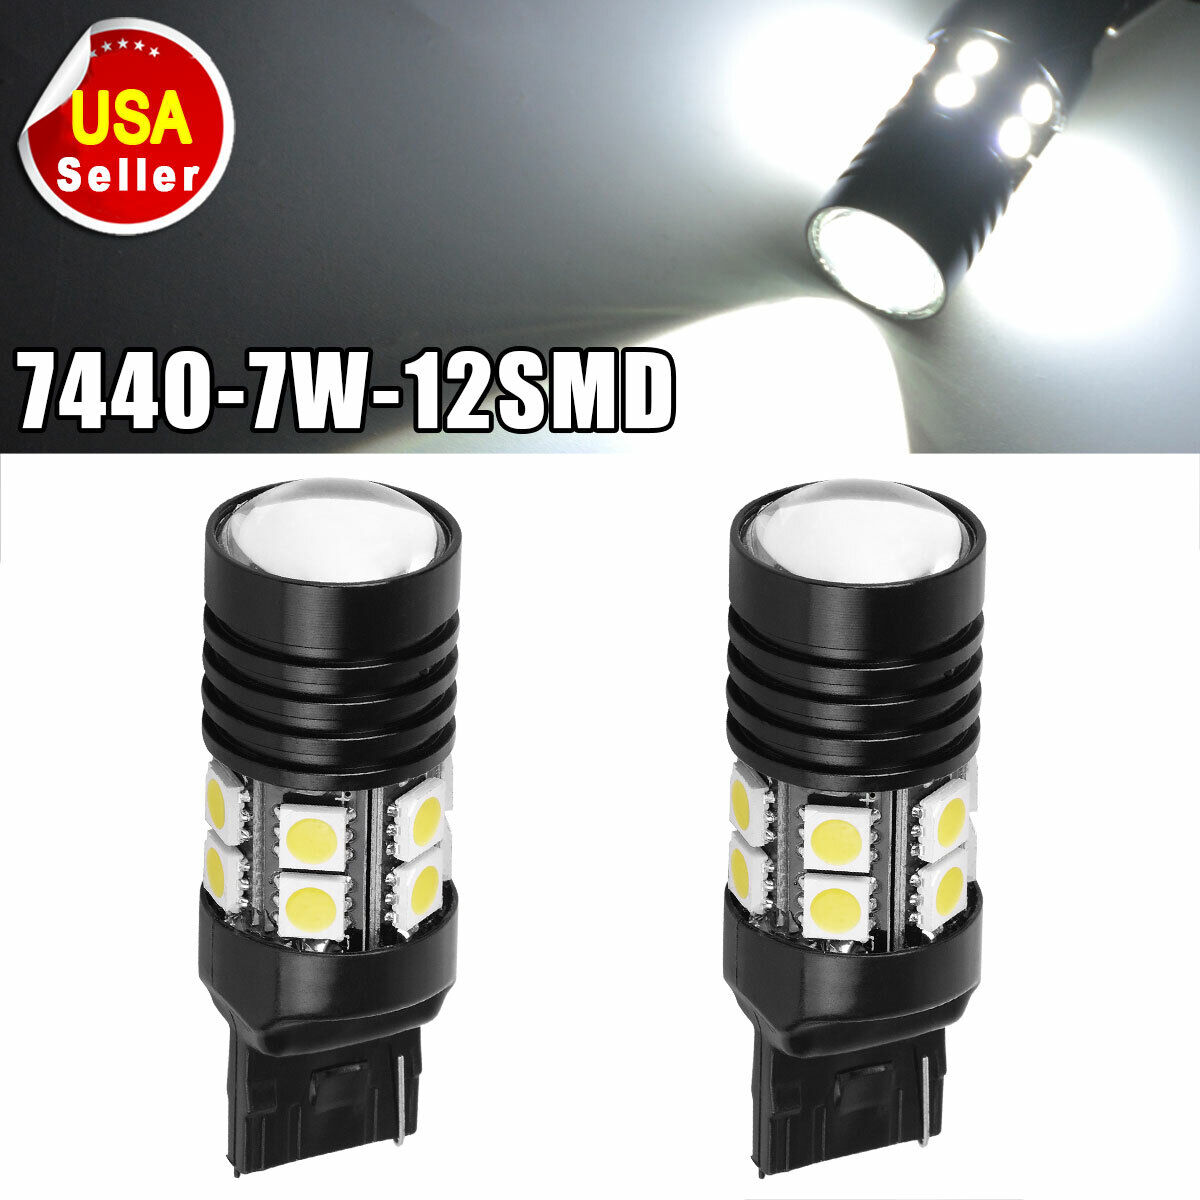 2x White 7440  12SMD LED Light Bulbs Turn Signal T20 7W High Power Projector